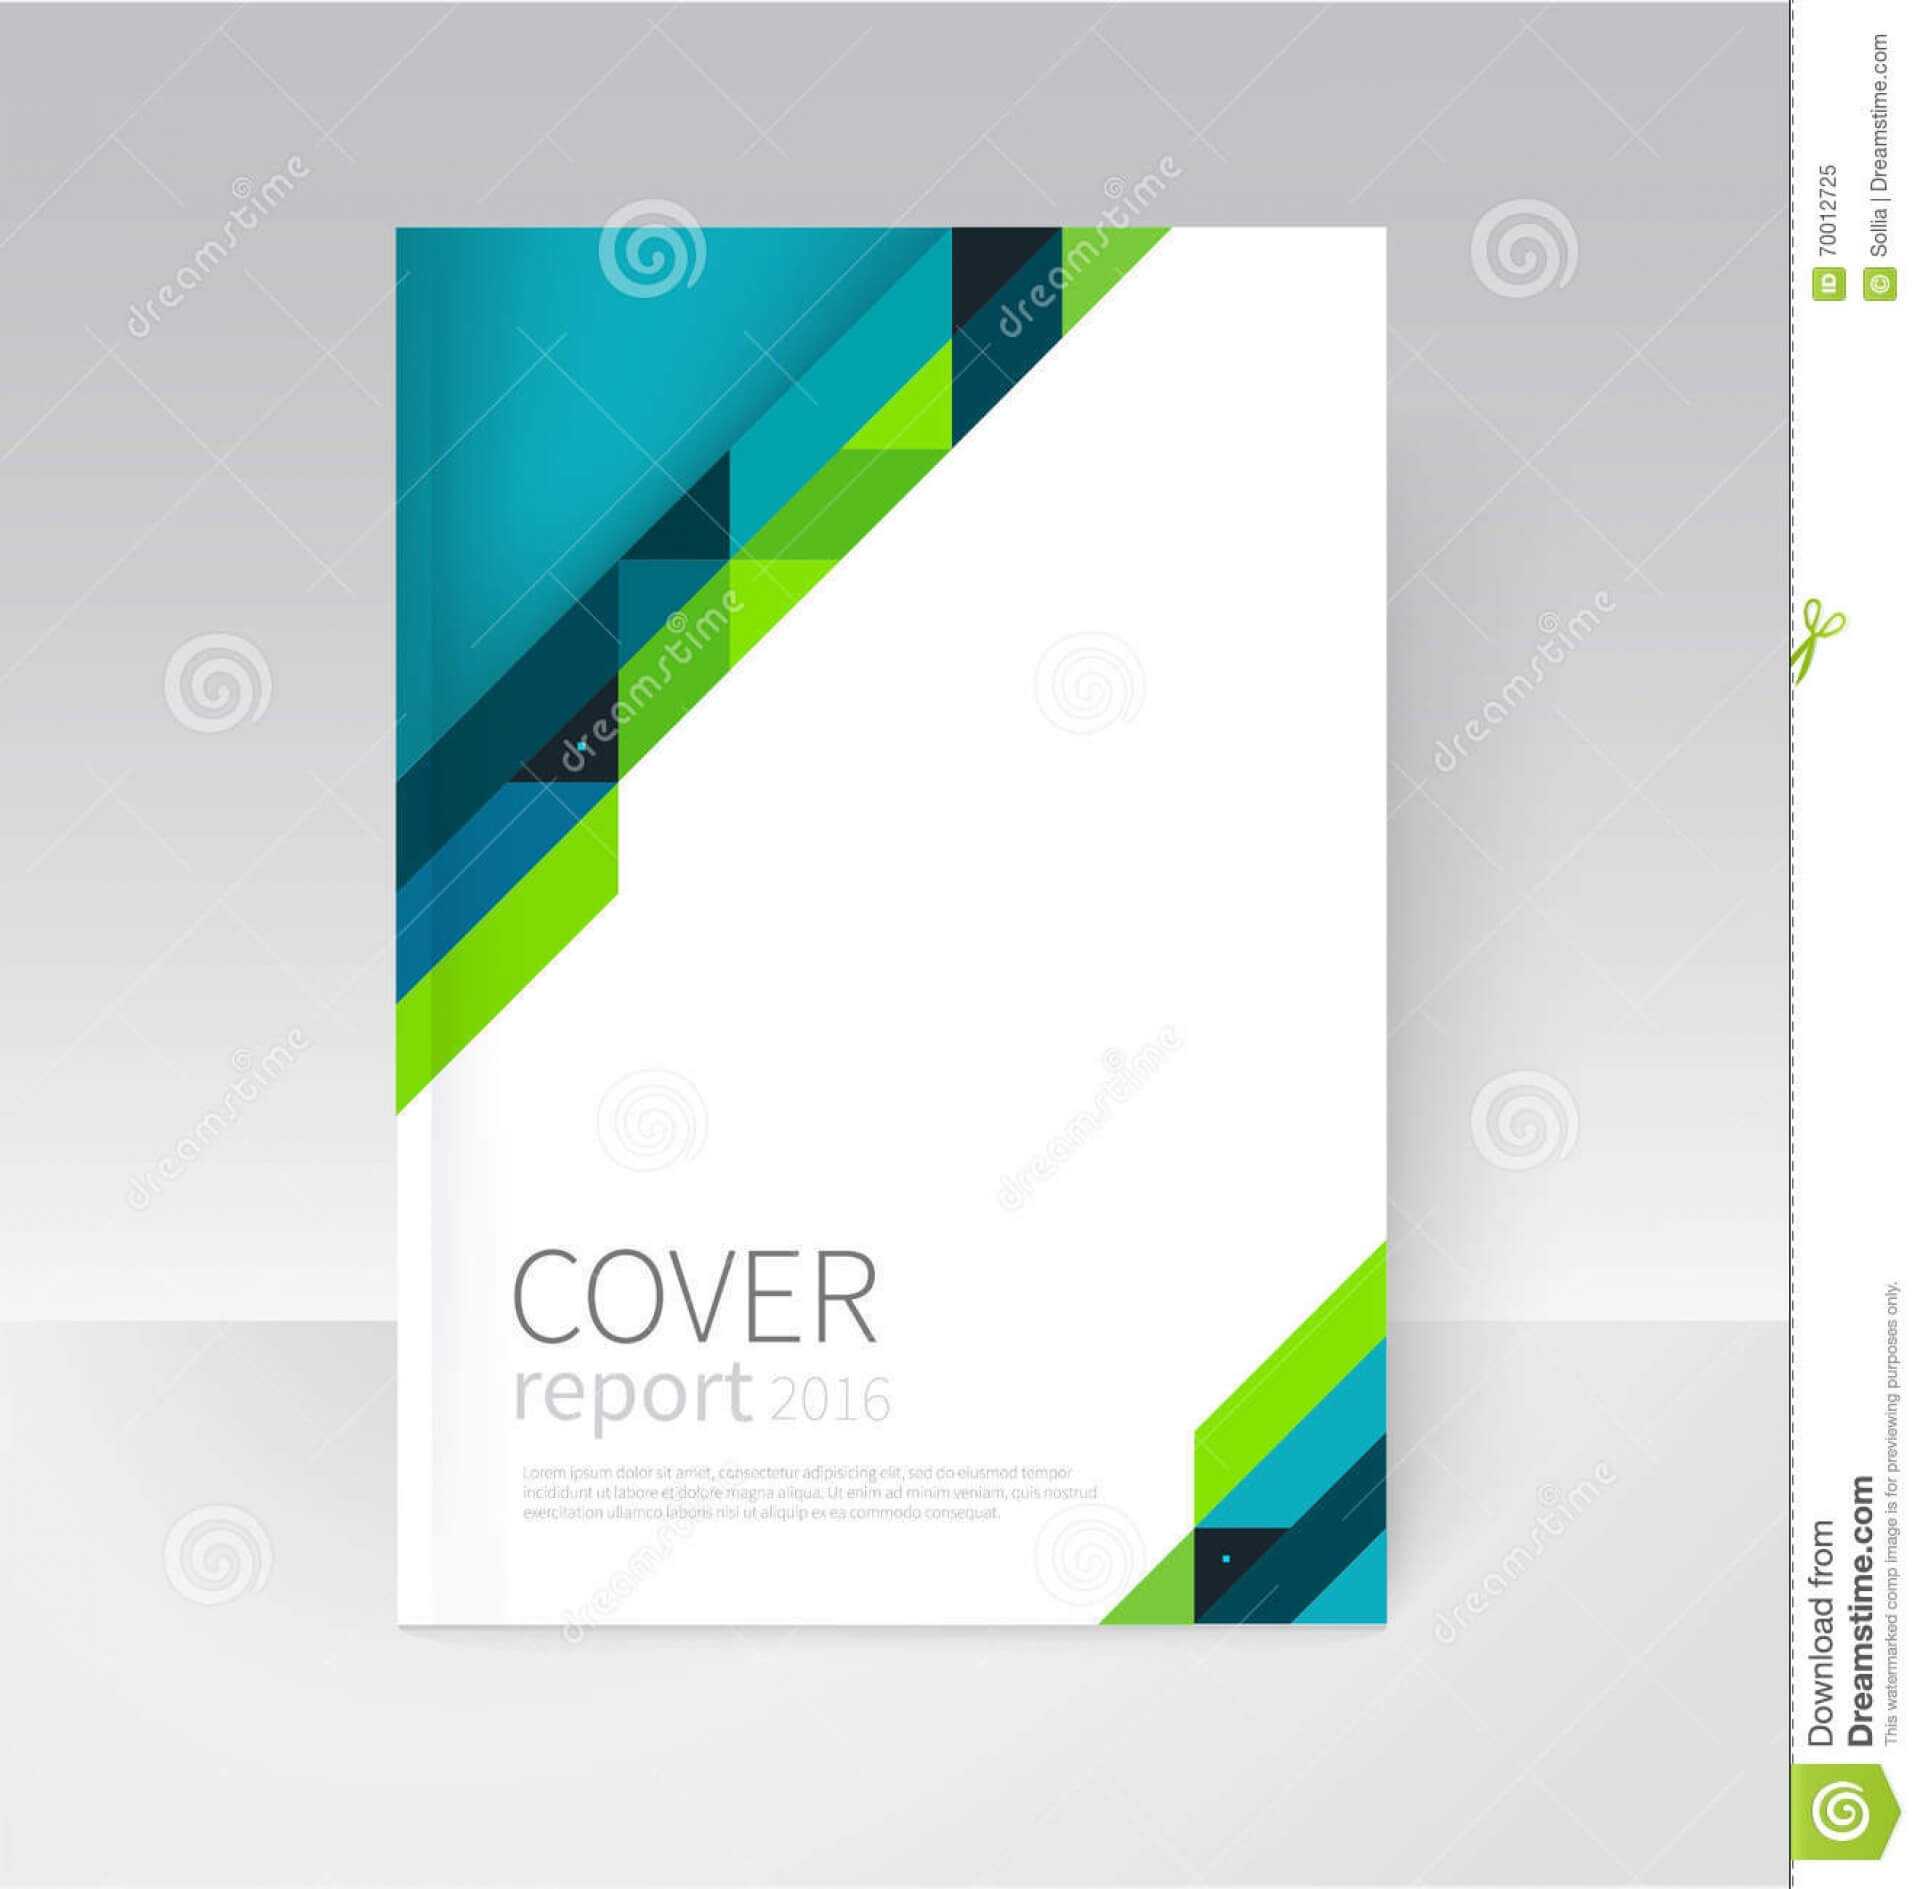 word cover page with image templates free download